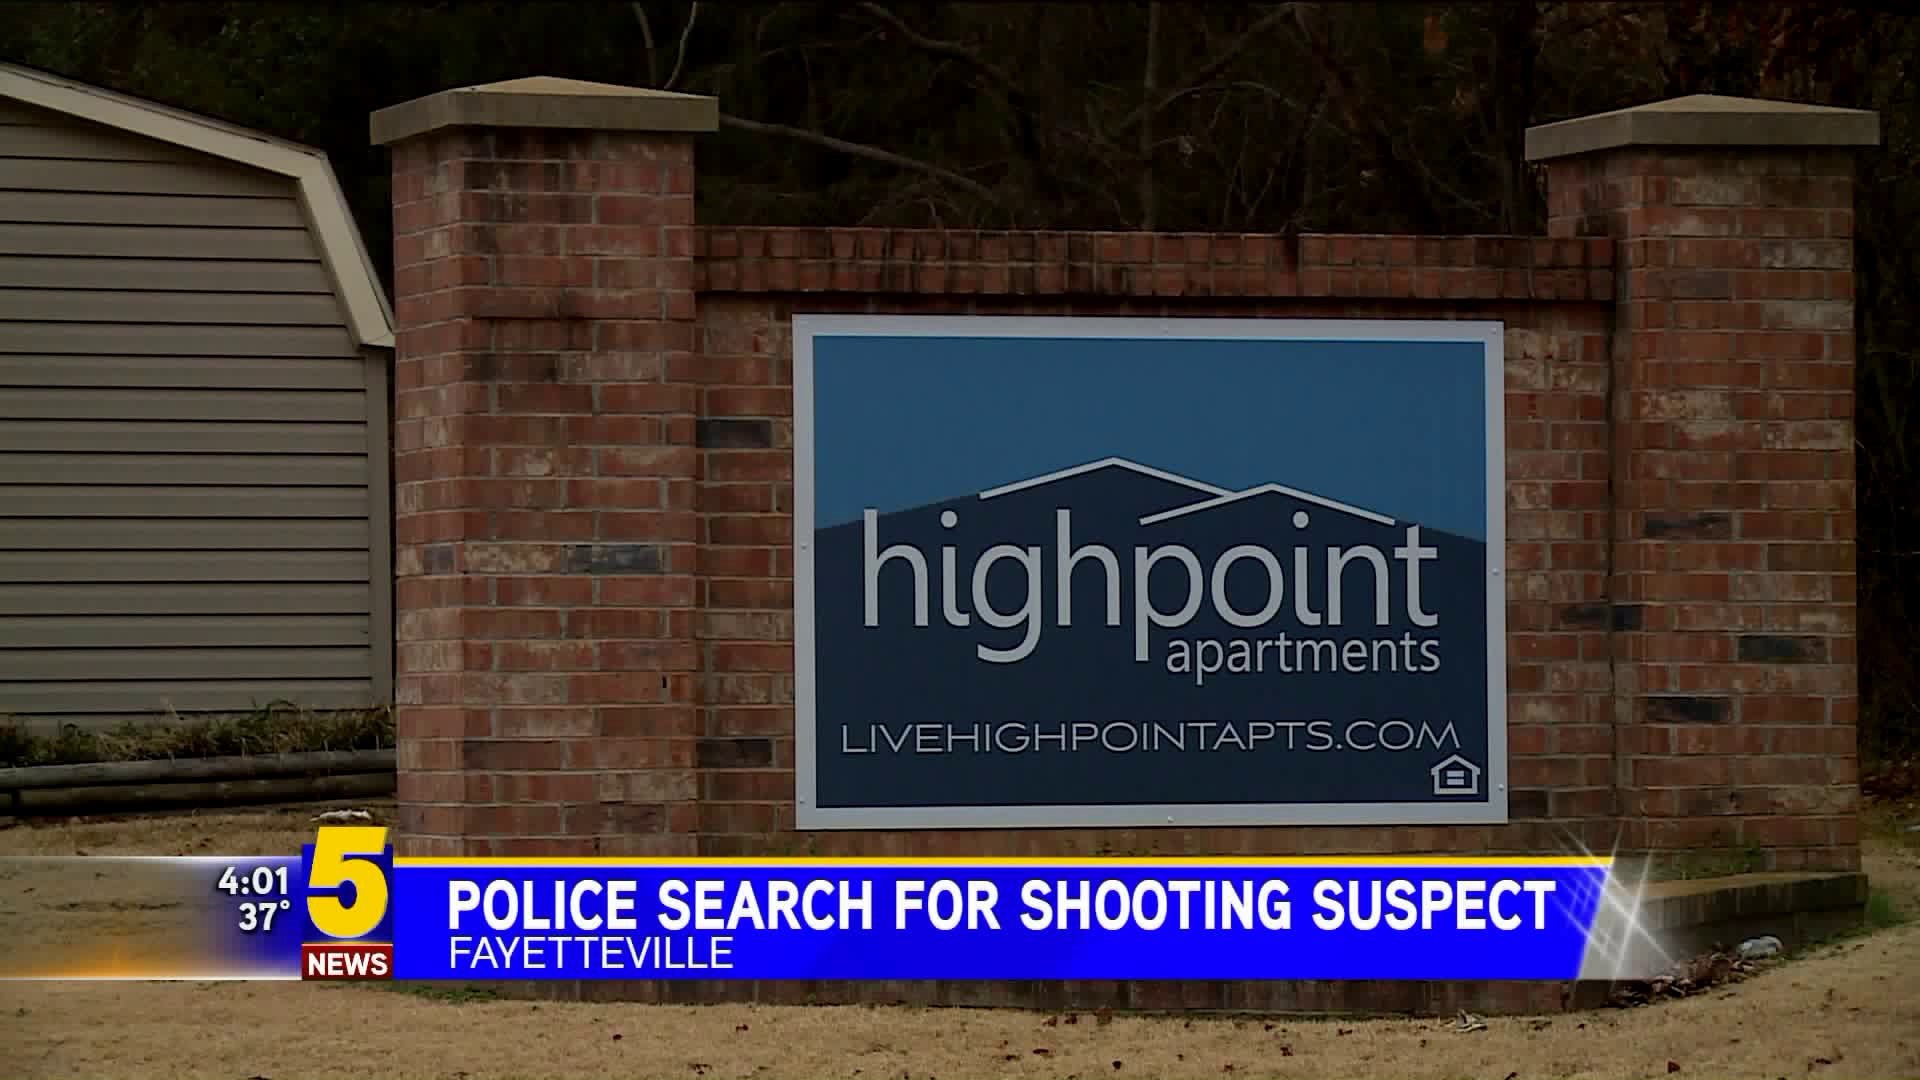 Police search for shooting suspect in Fayetteville